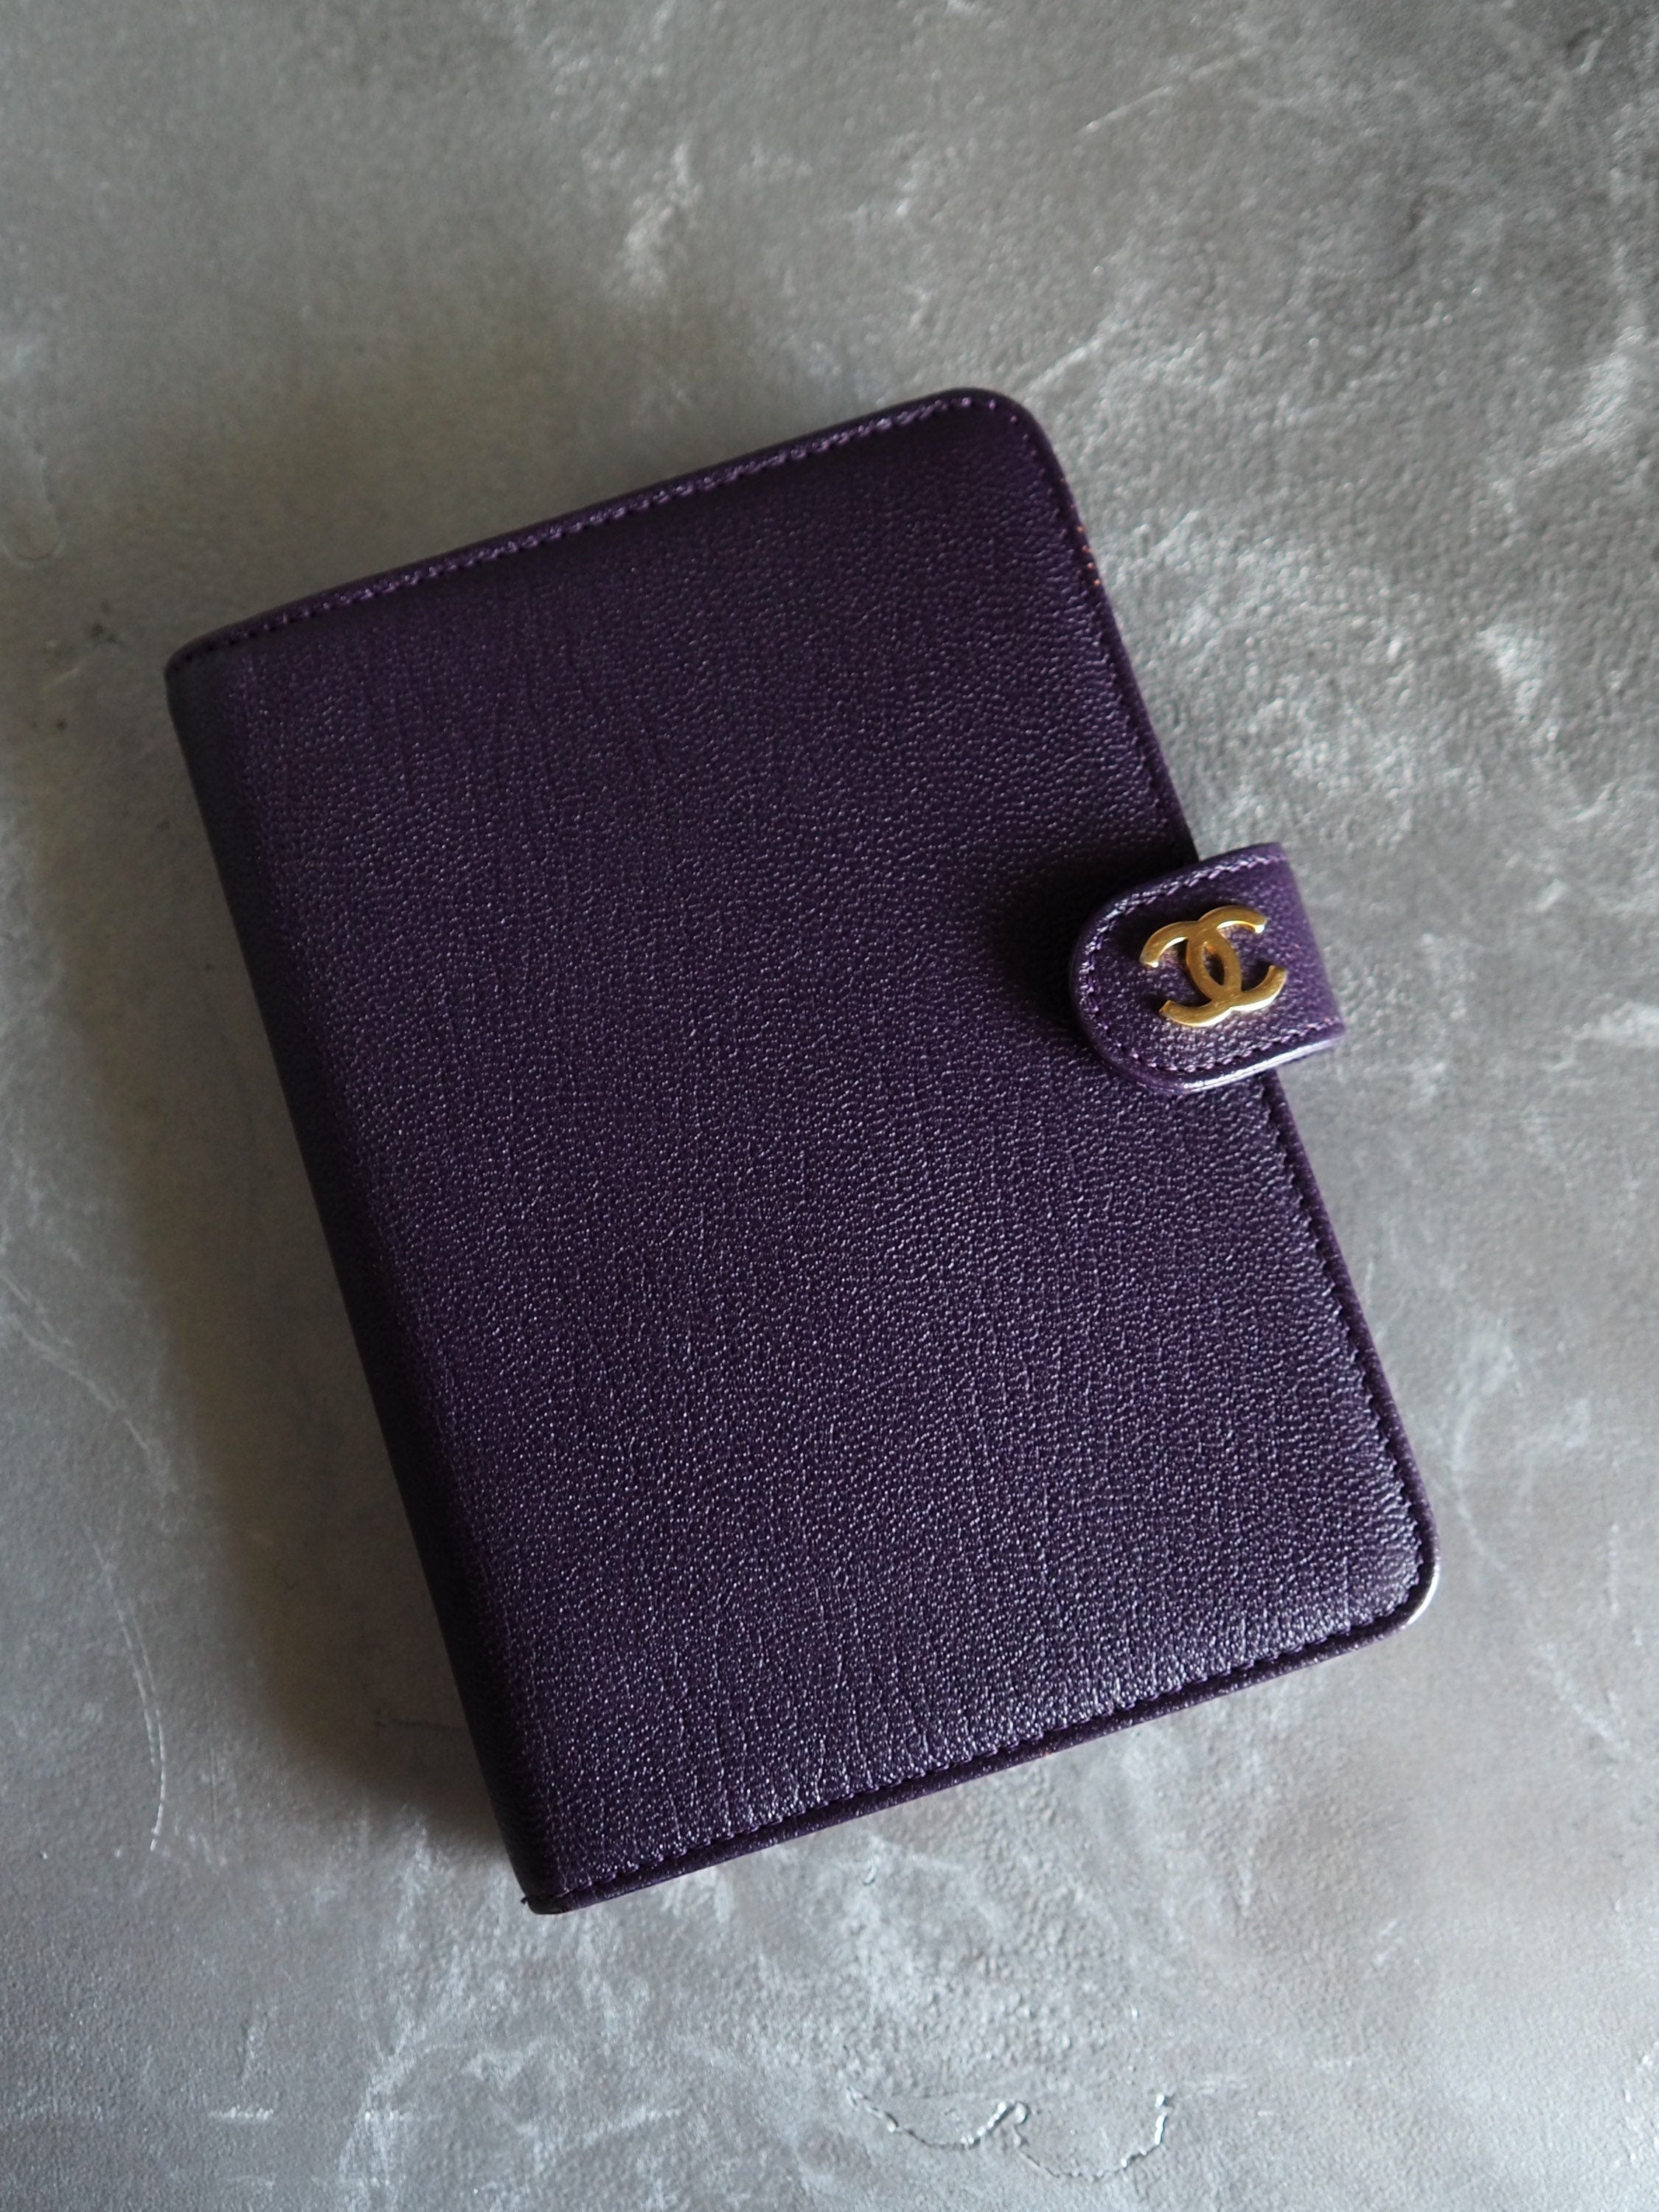 CHANEL COCO Leather 6 Ring Agenda Diary Purple Vintage